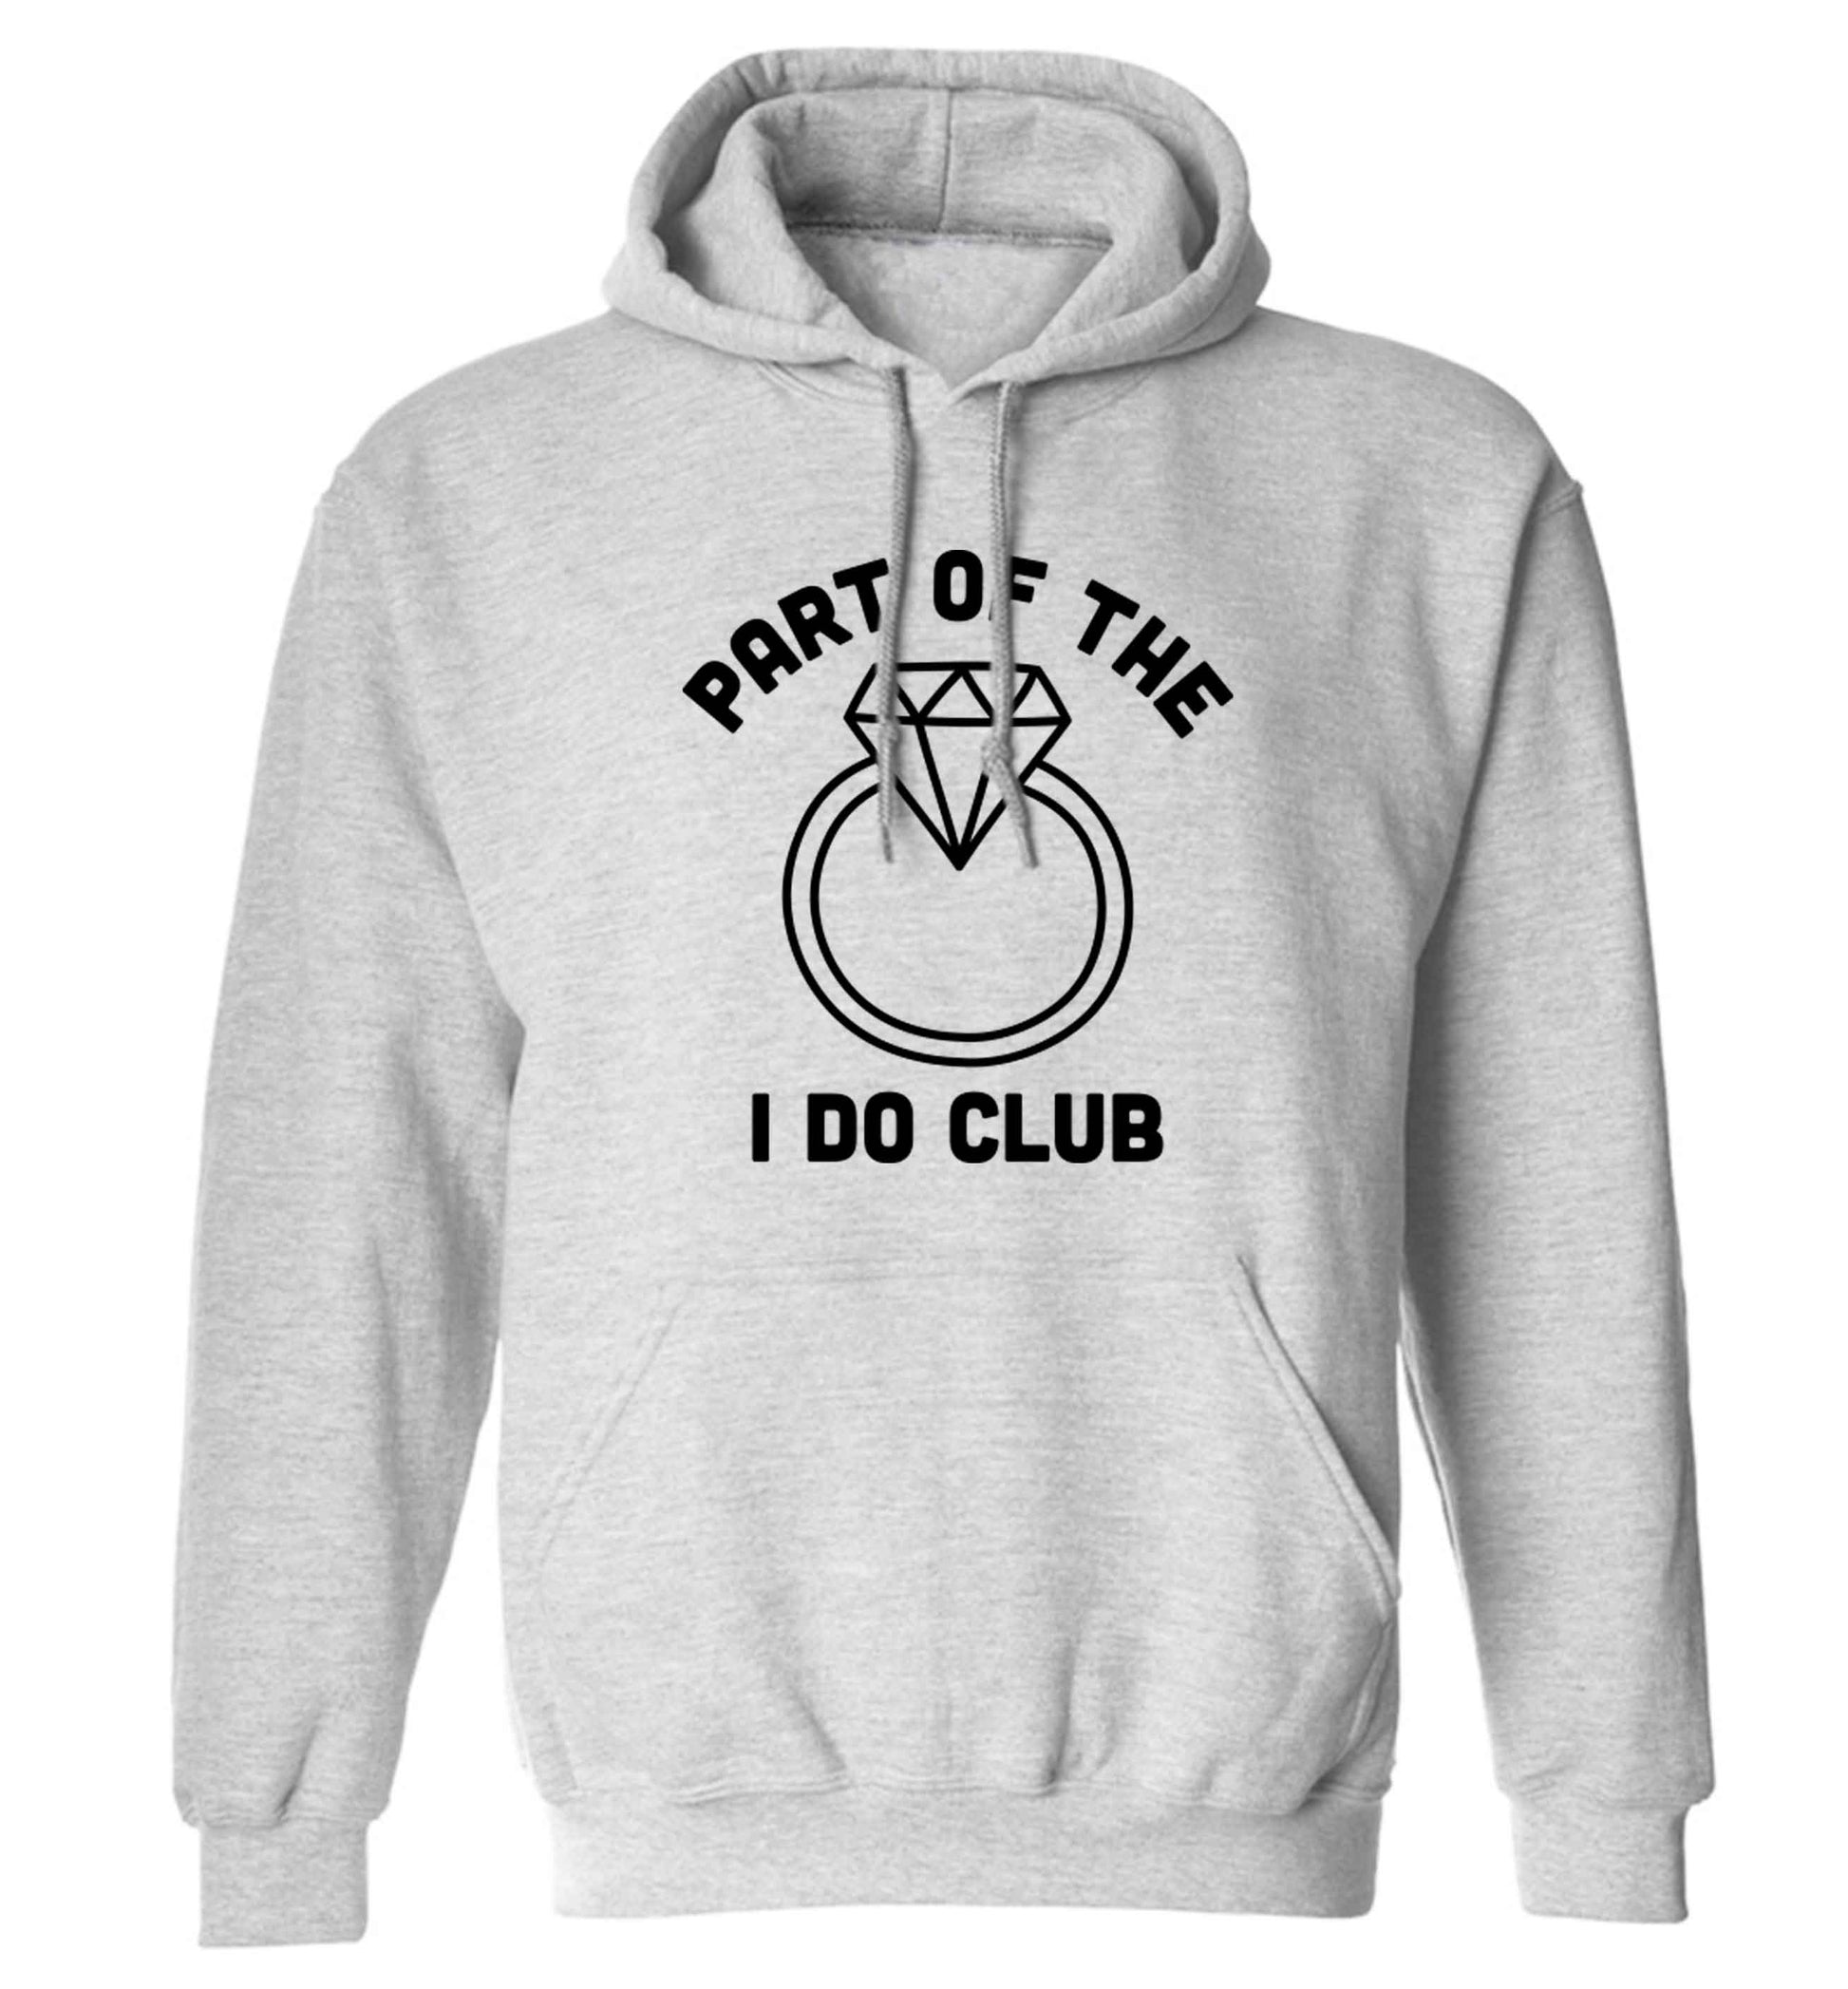 Part of the I do club adults unisex grey hoodie 2XL